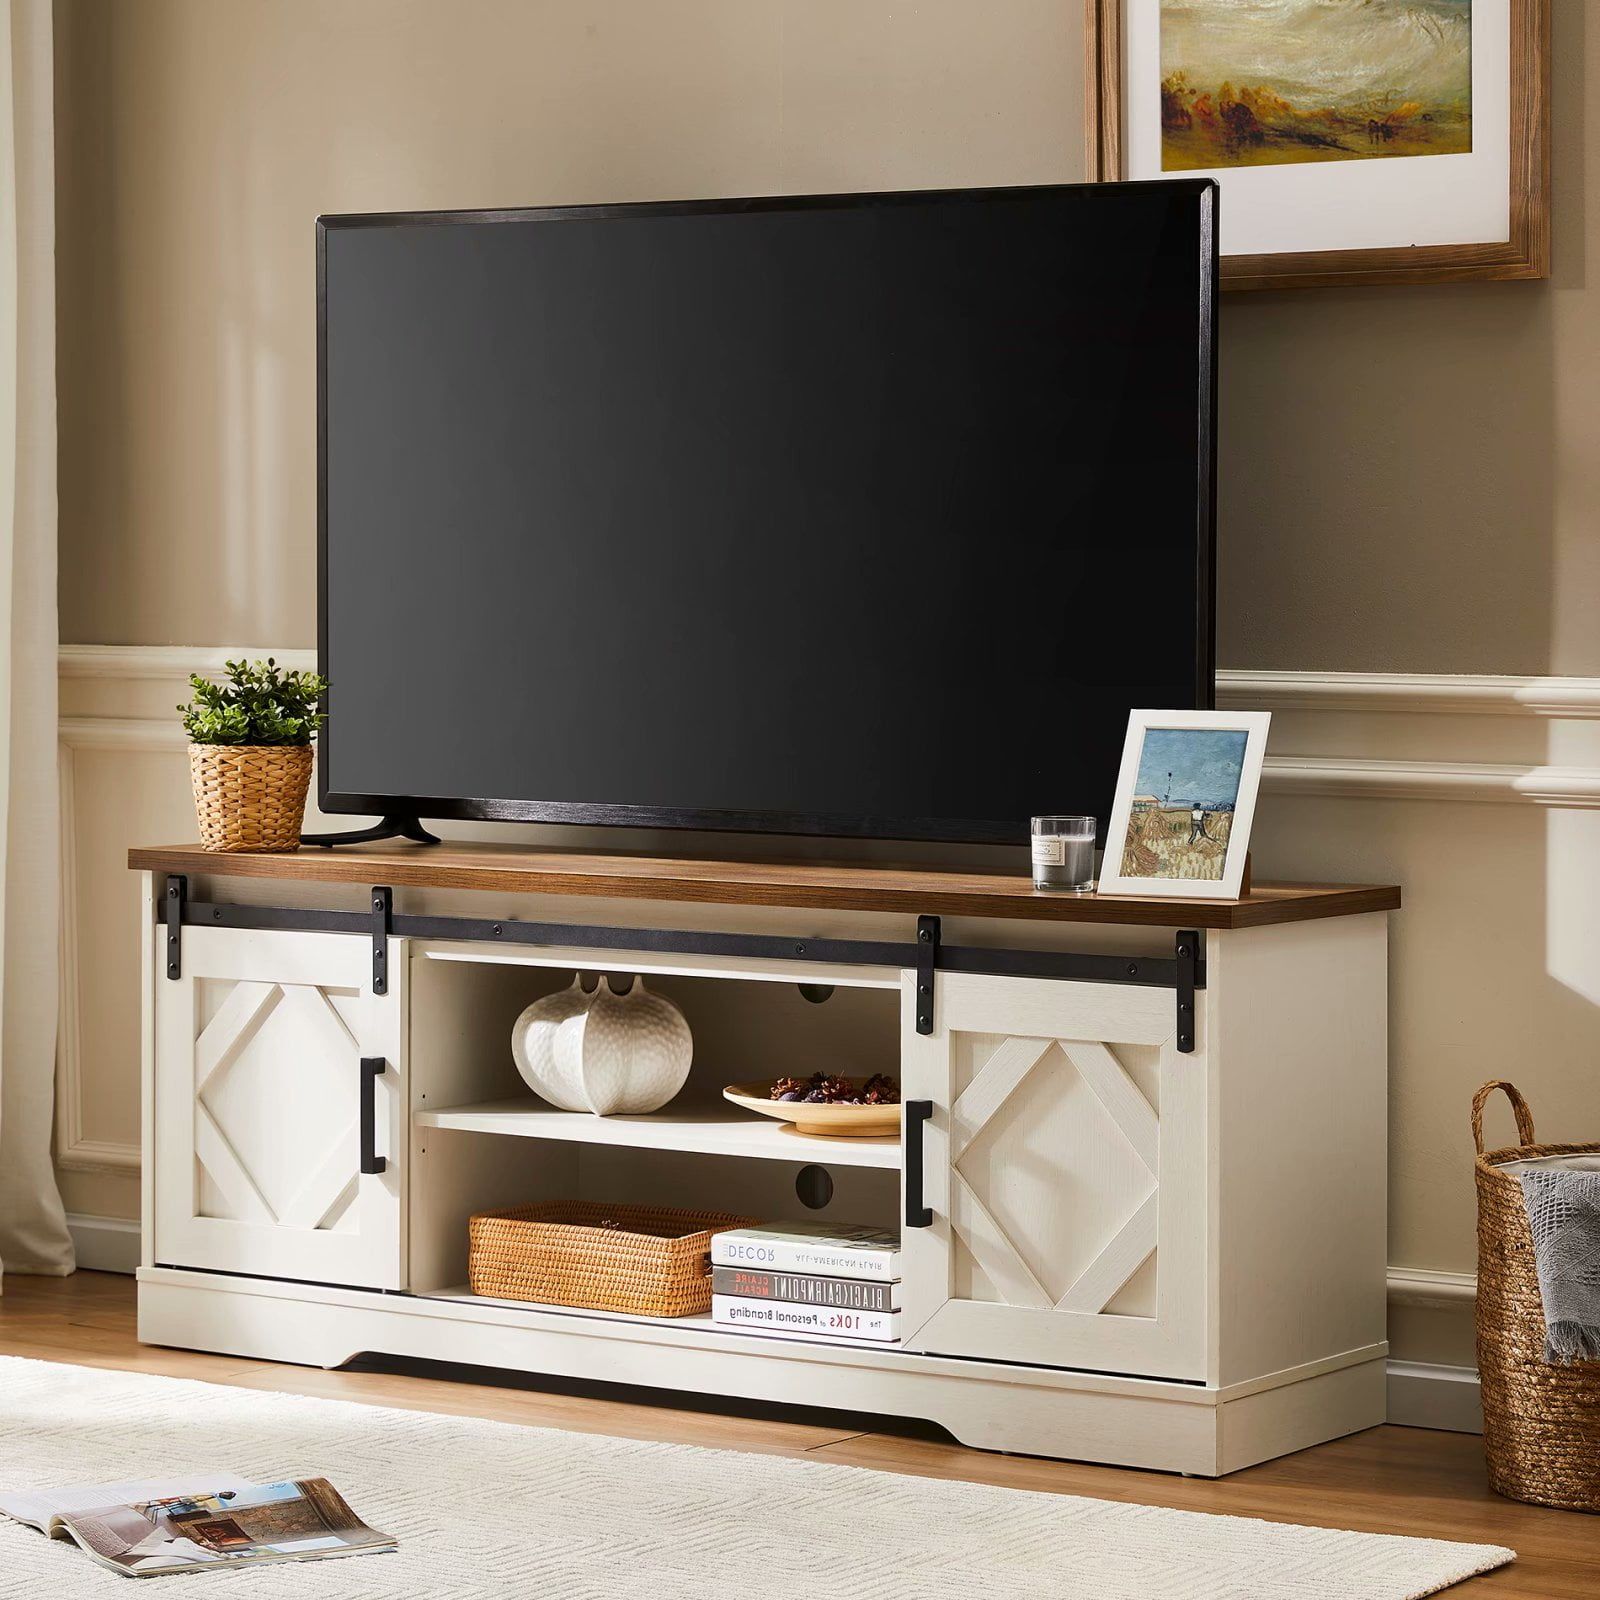 Farmhouse Tv Stand For Tv Up To 65", Sliding Barn Door Entertainment Inside Barn Door Media Tv Stands (View 20 of 20)